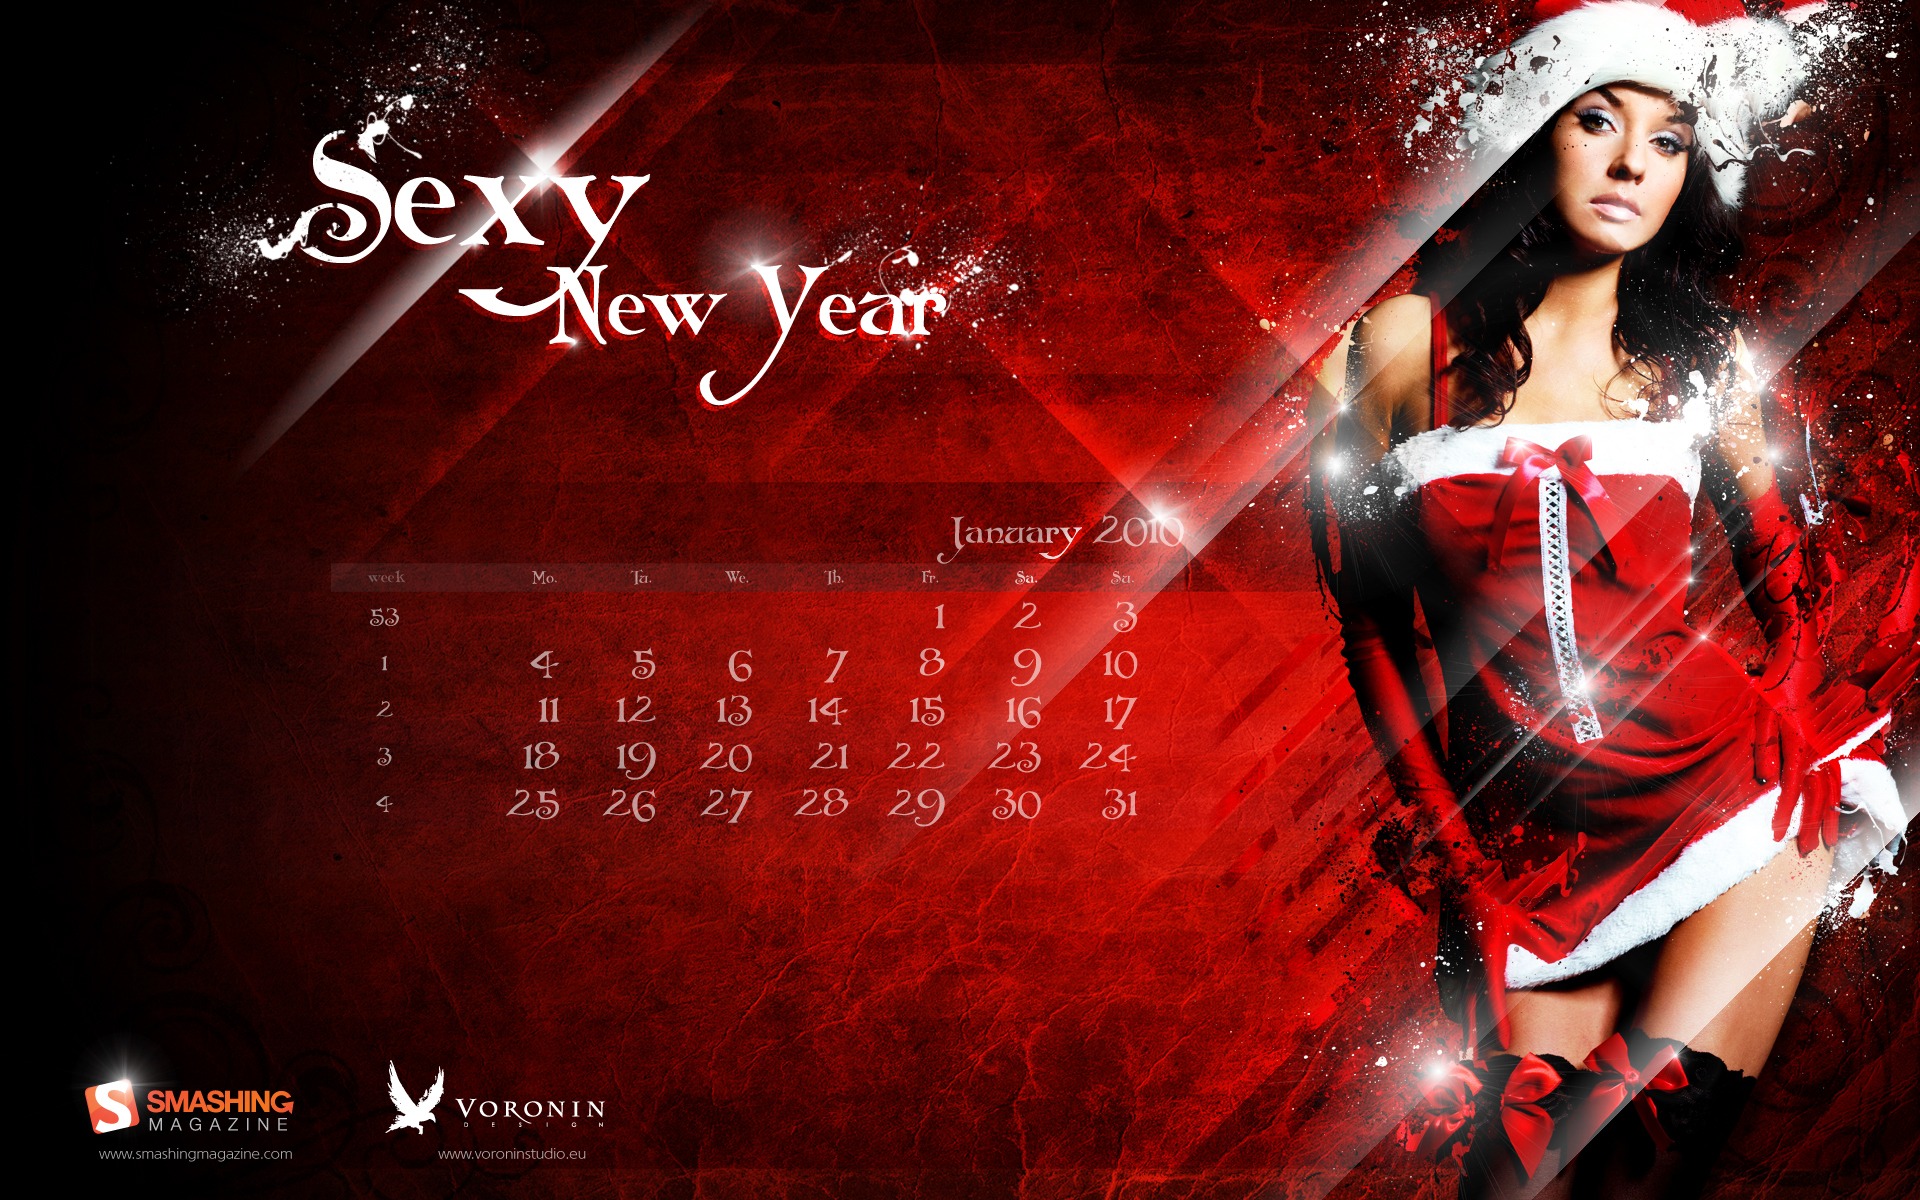 Microsoft Official Win7 New Year Wallpapers #20 - 1920x1200